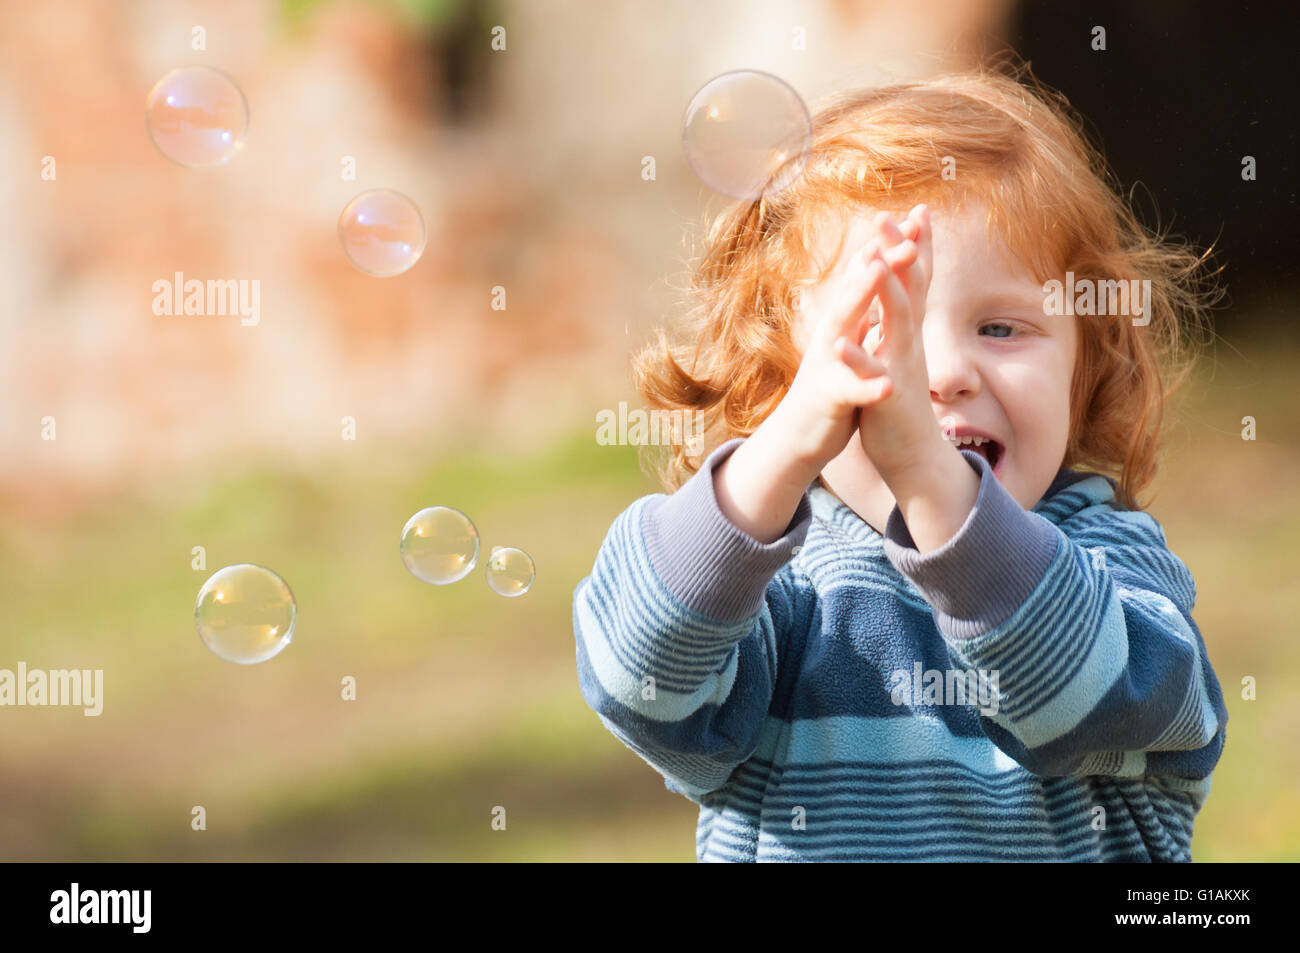 Happy girl trying to catch soap bubble Stock Photo